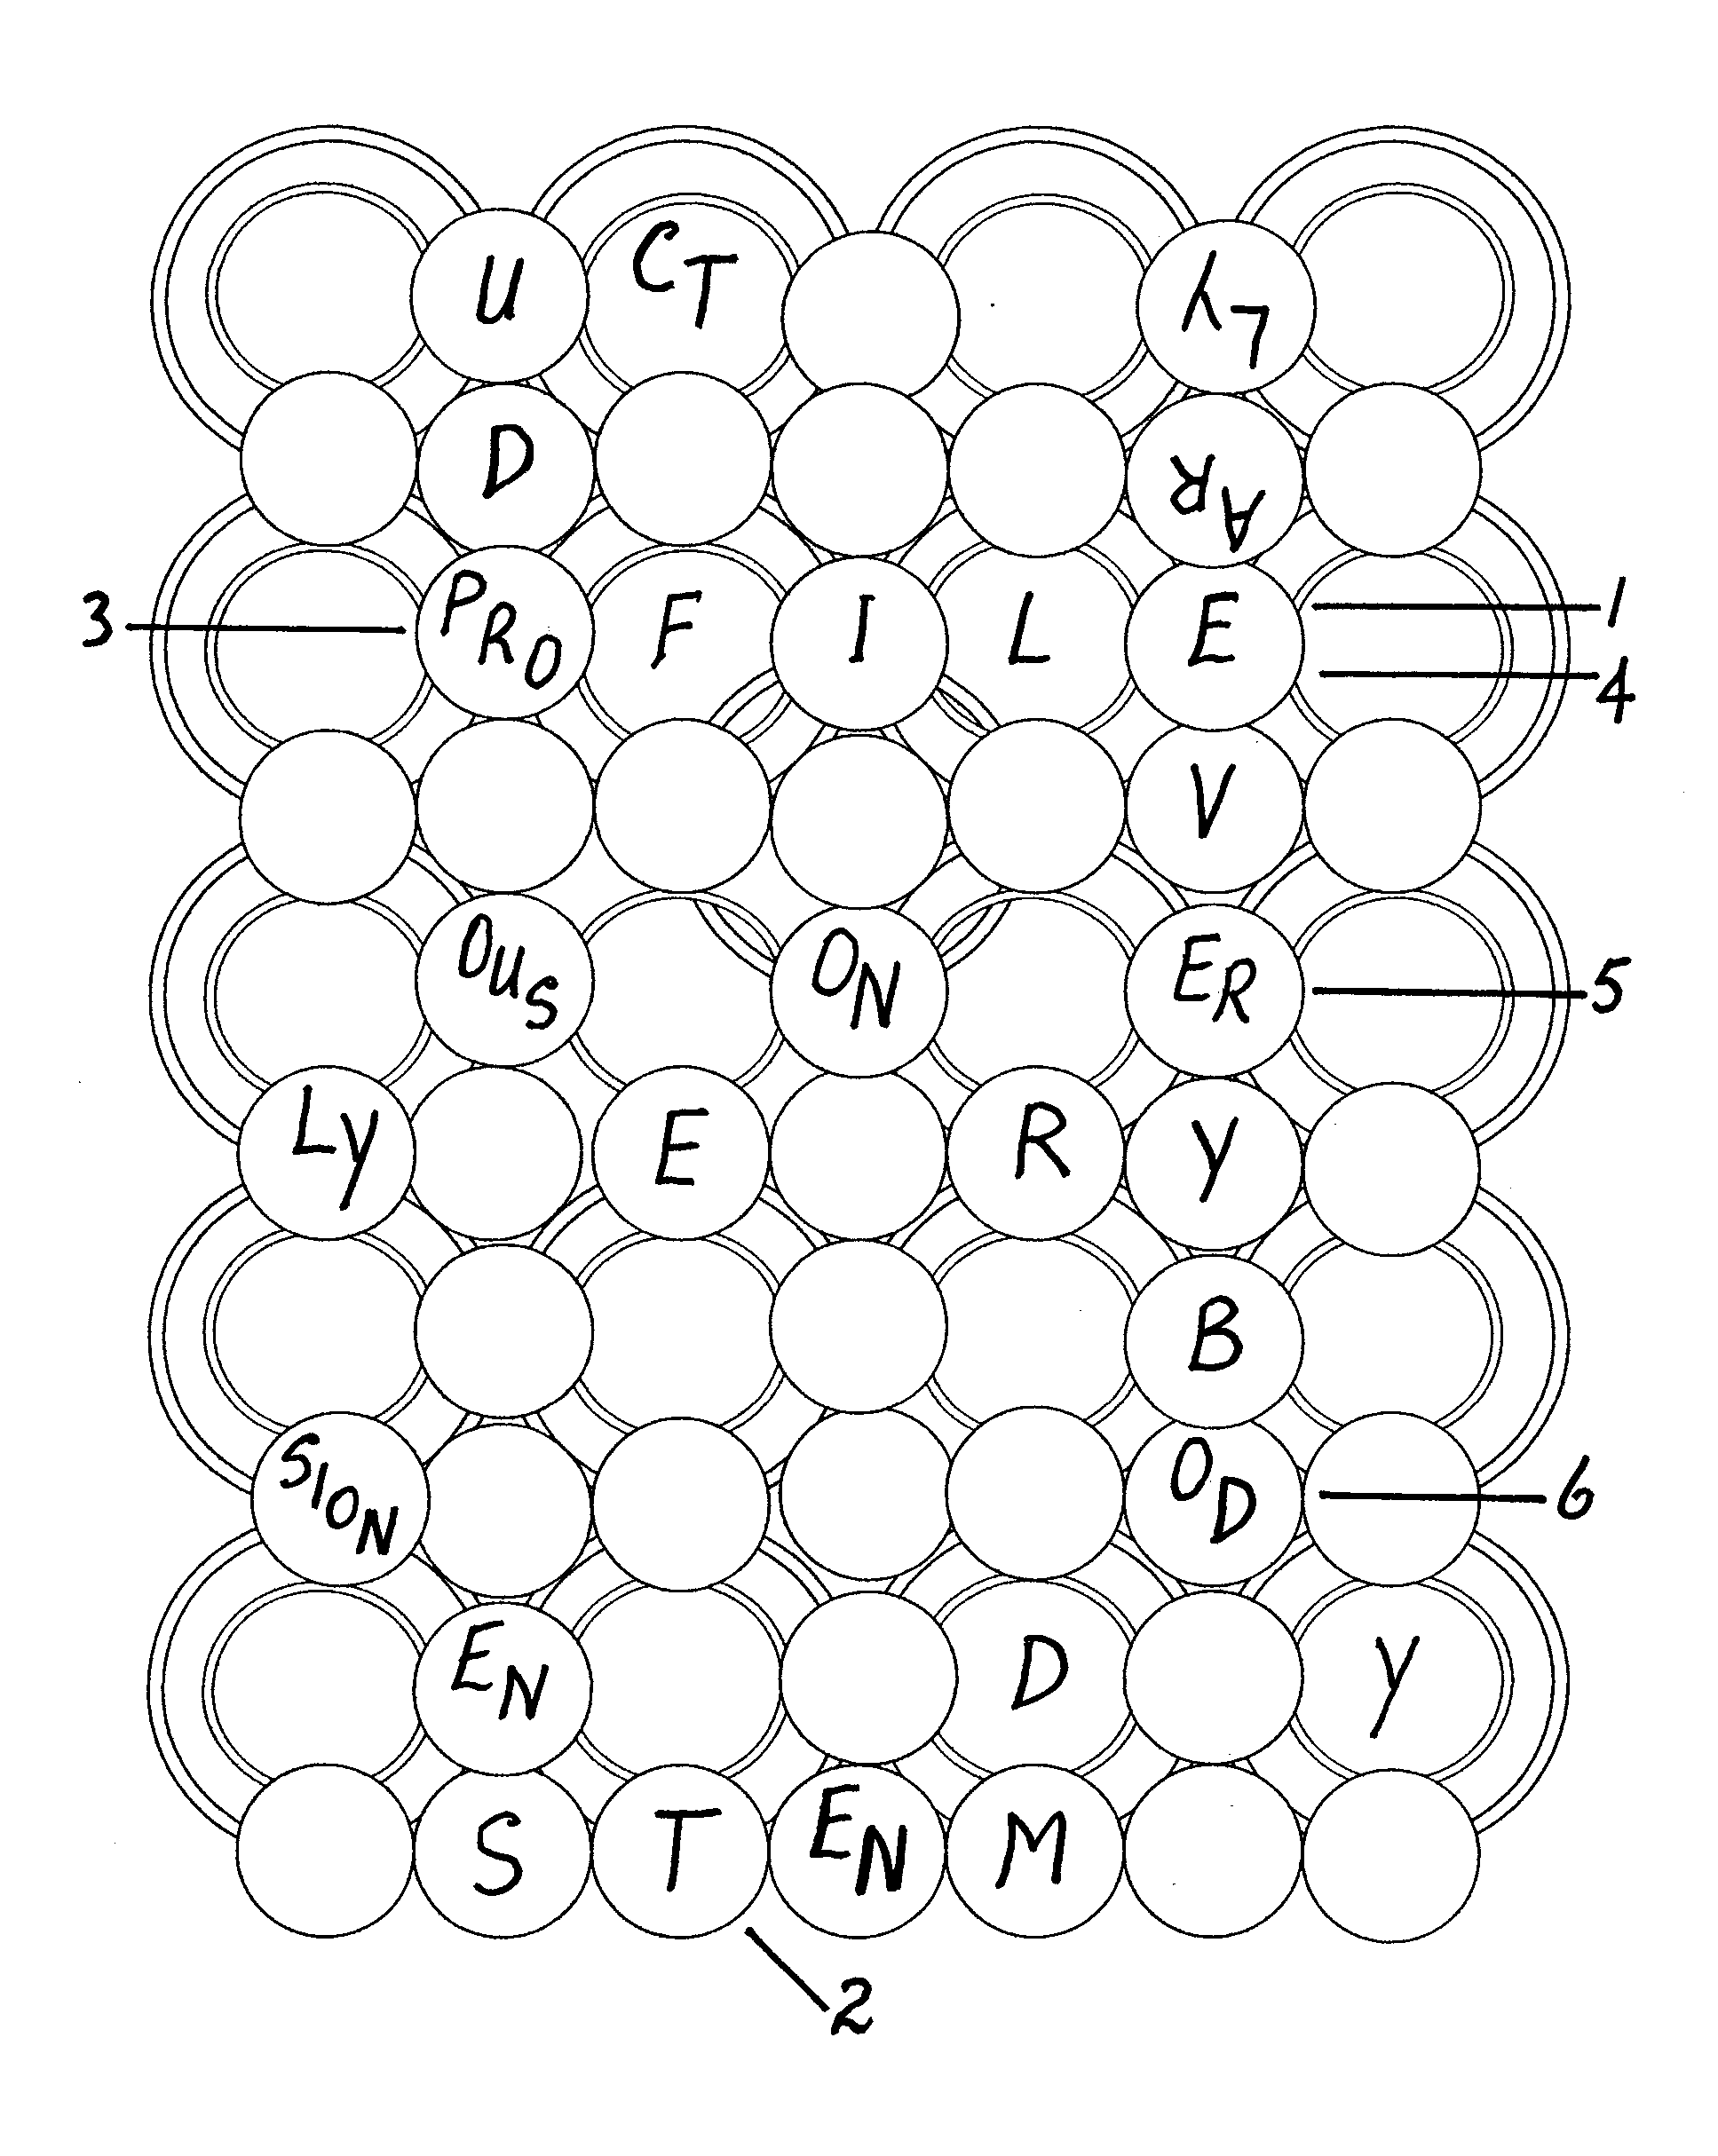 Board game for building words with single-letter and multiple-letter tiles on a plurality of multi-directional pathways